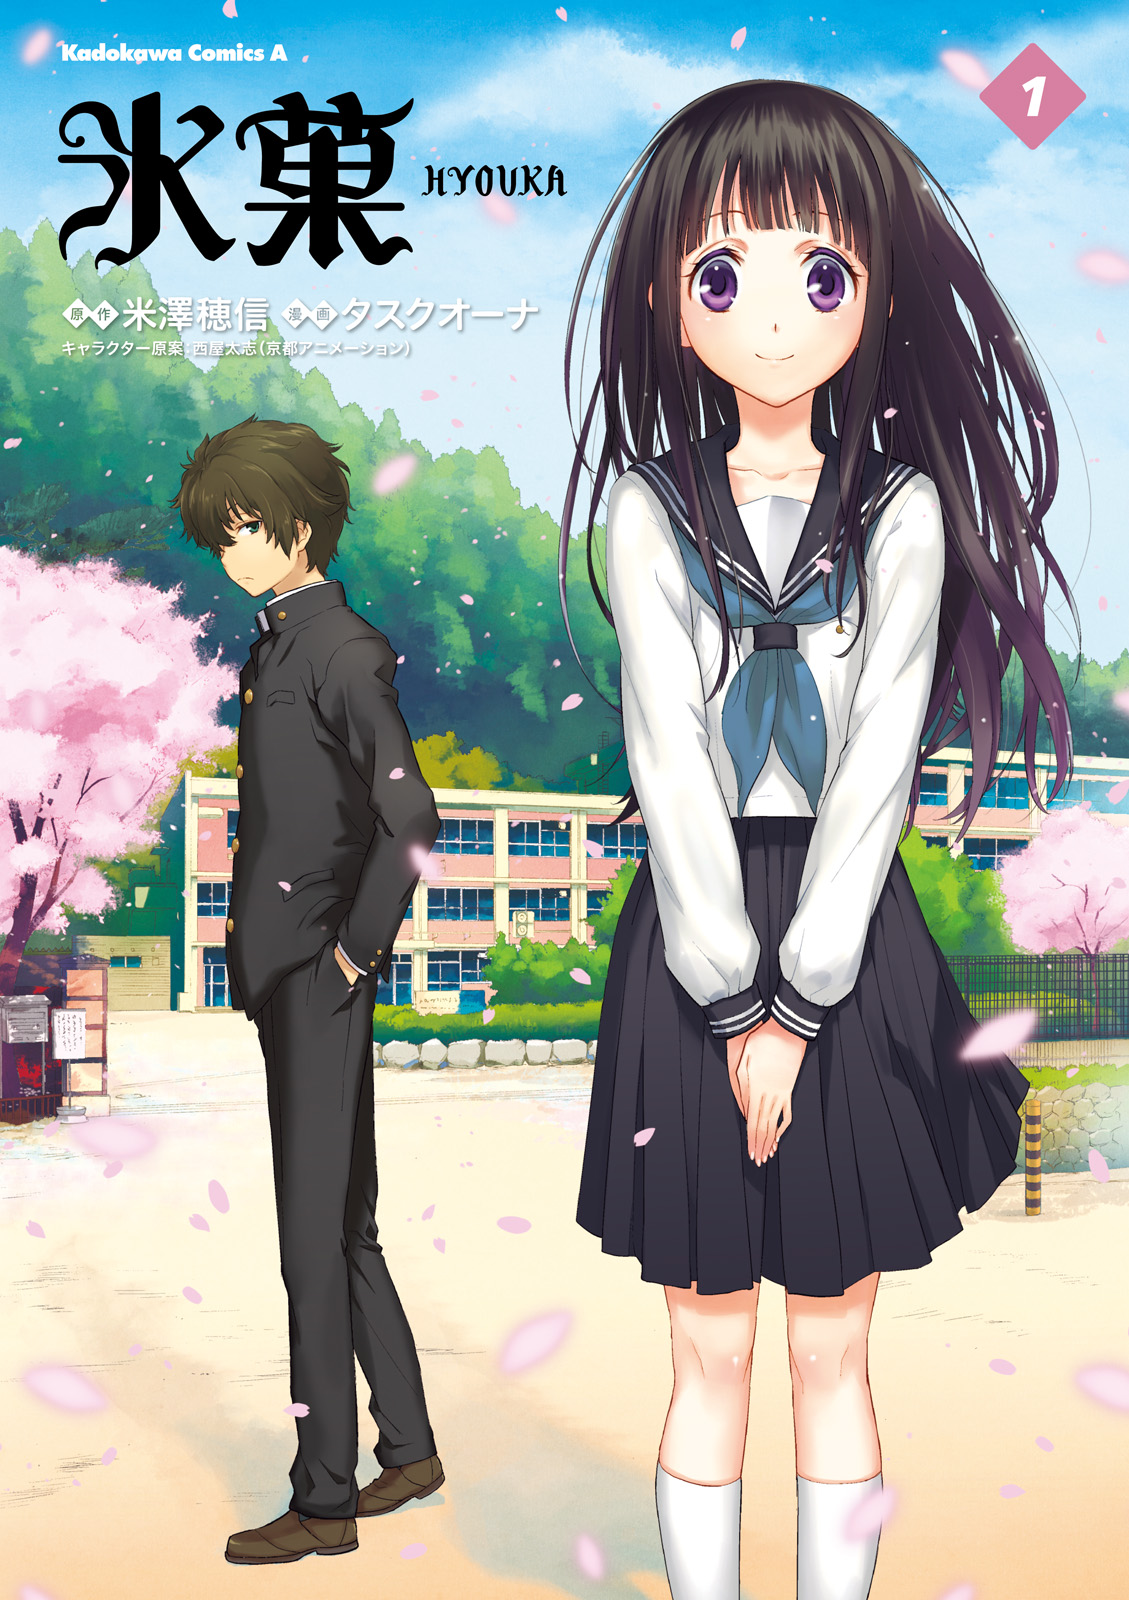 When Does Hyouka Season 2 Come Out? Answered - Twinfinite